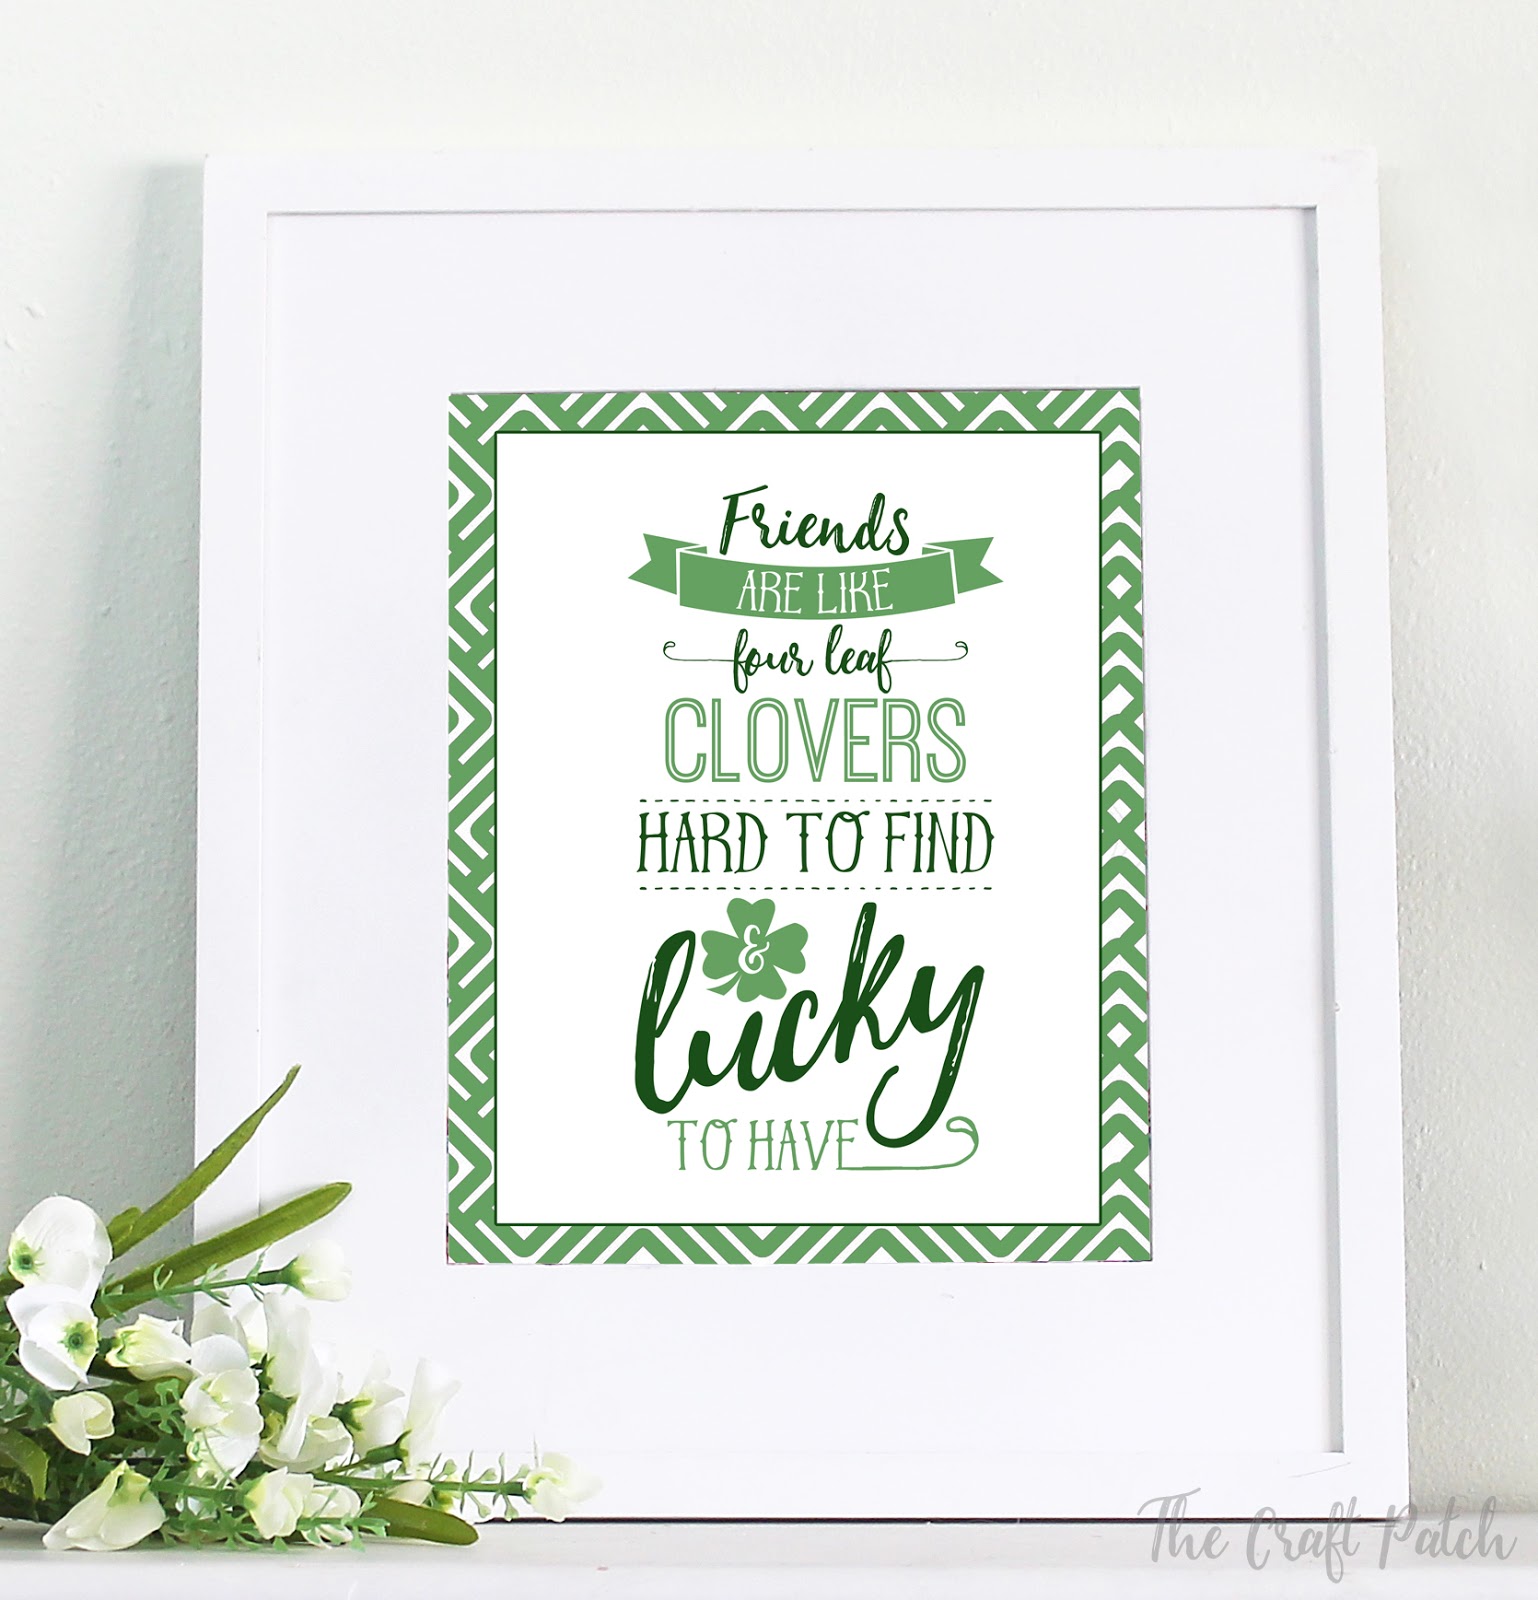 Patricks Day Card ~ A Four-Leaf Clover By Out Of The Blue  ~ Free P&P St